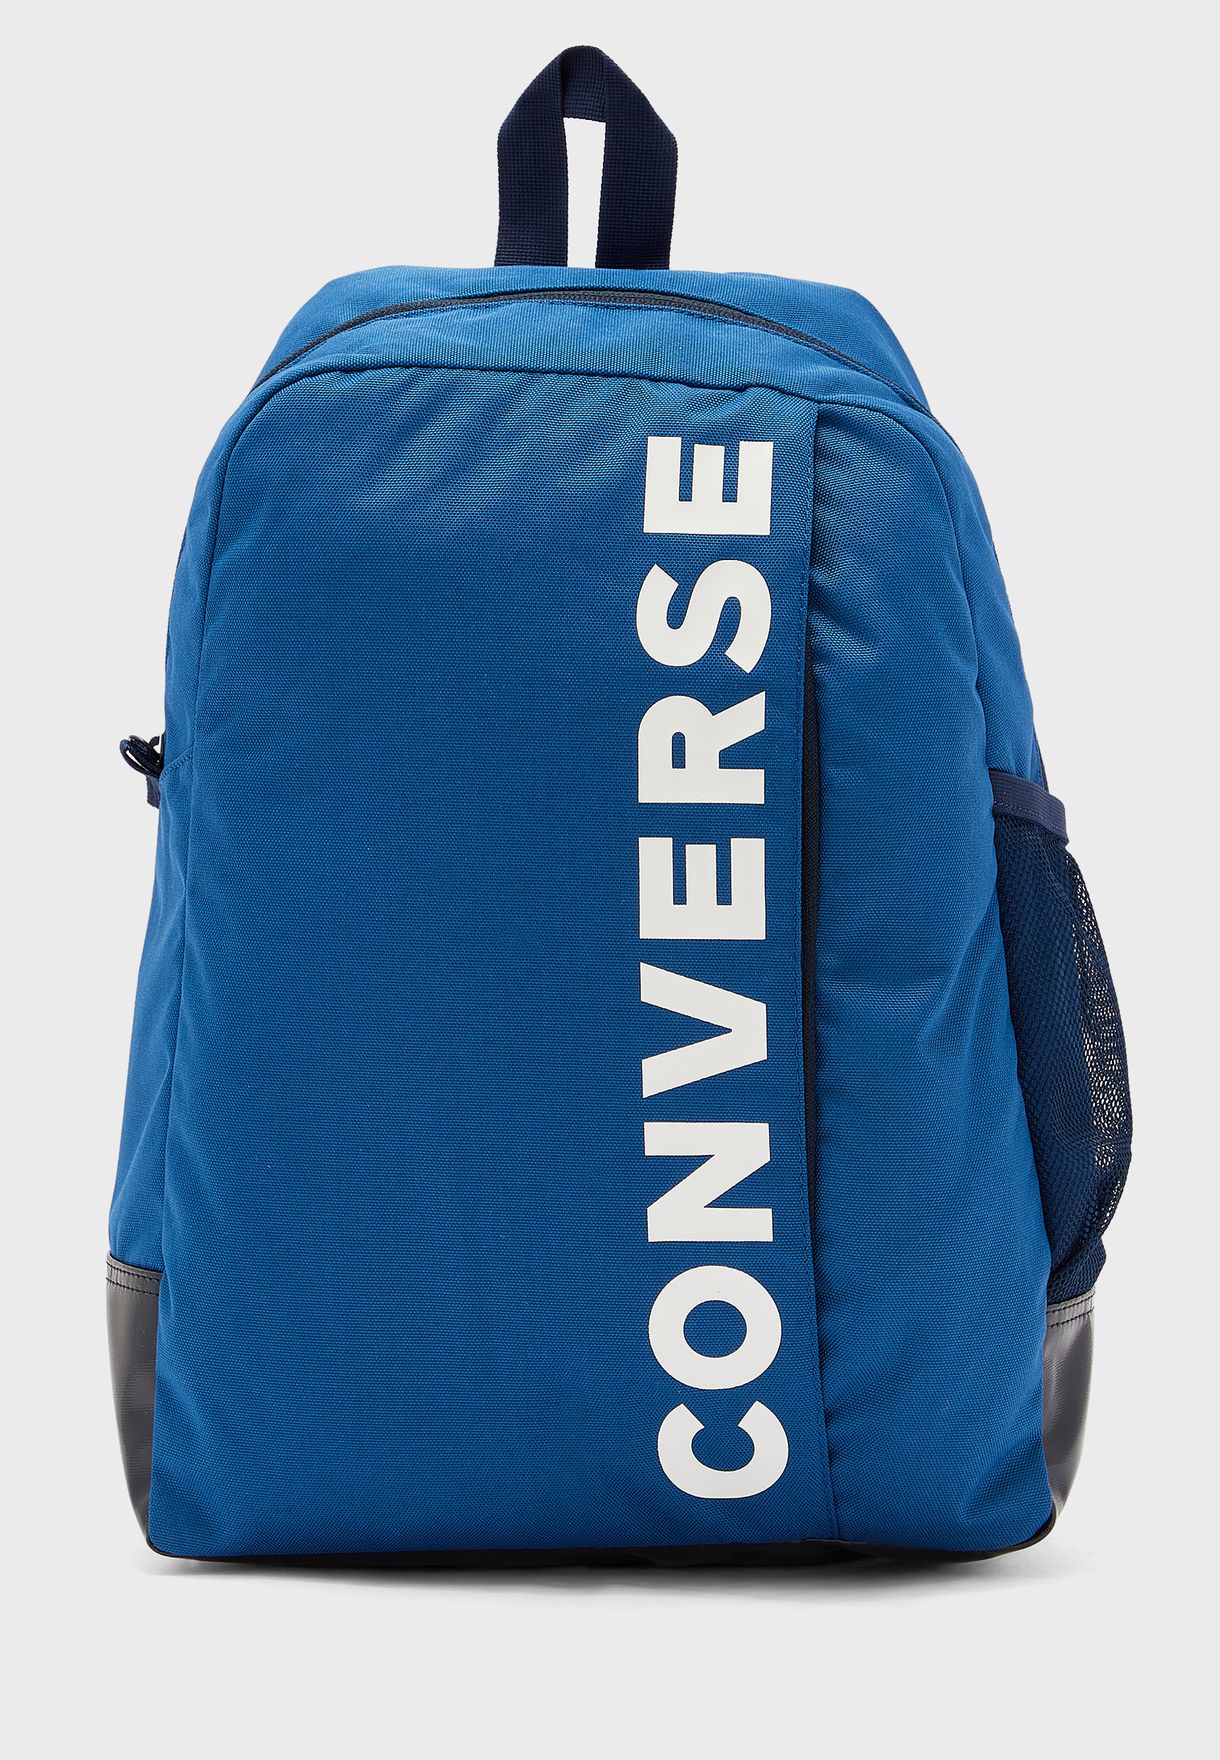 converse speed 2 backpack